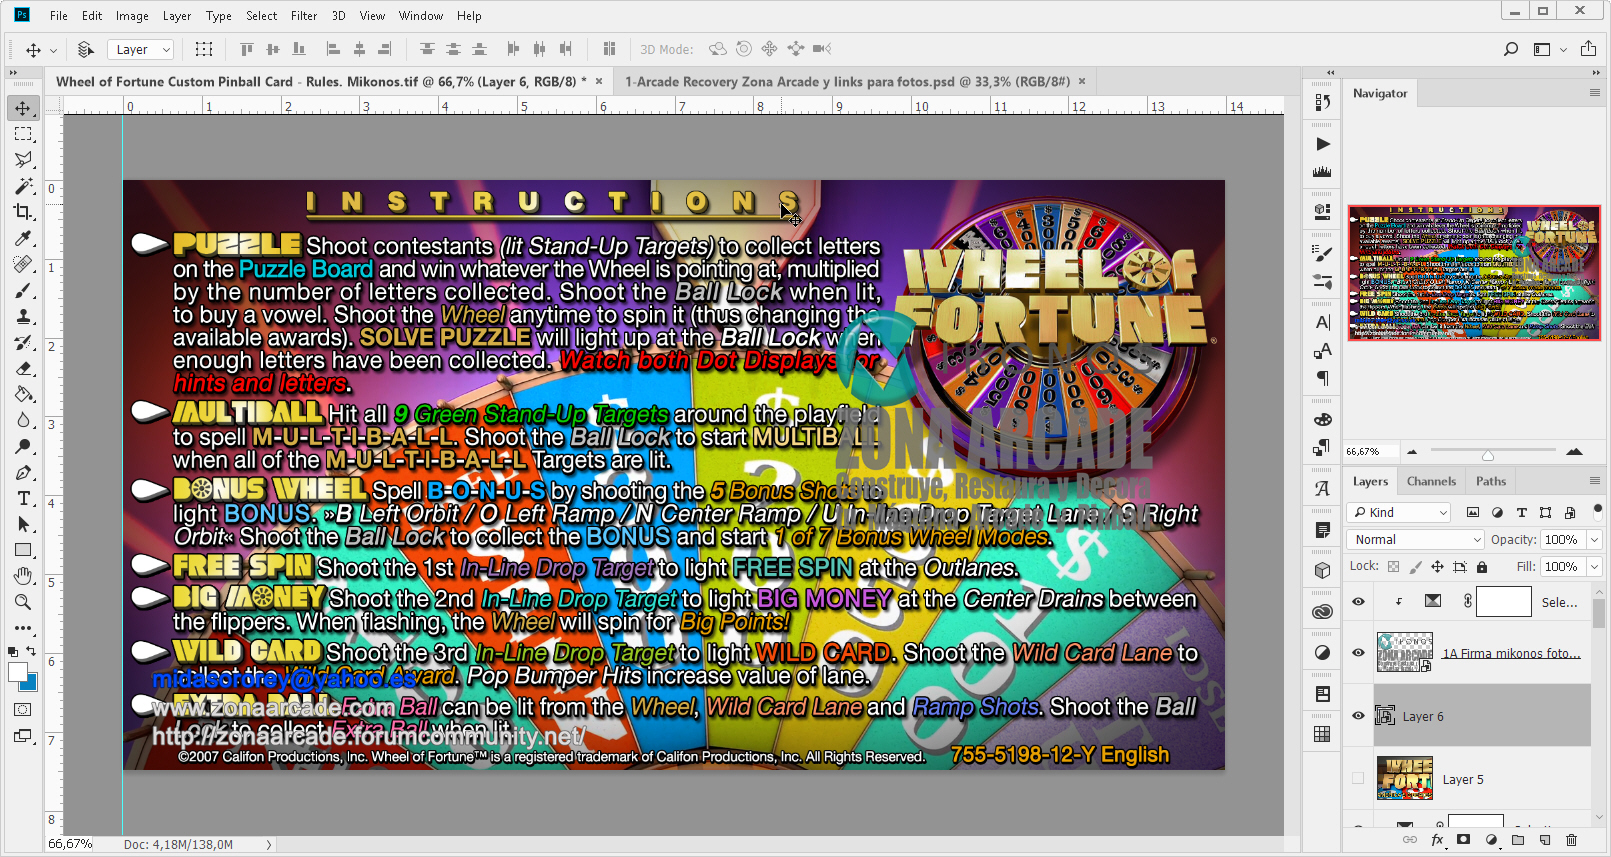 Wheel-of-Fortune-Pinball-Card-Customized-Rules2-Mikonos1